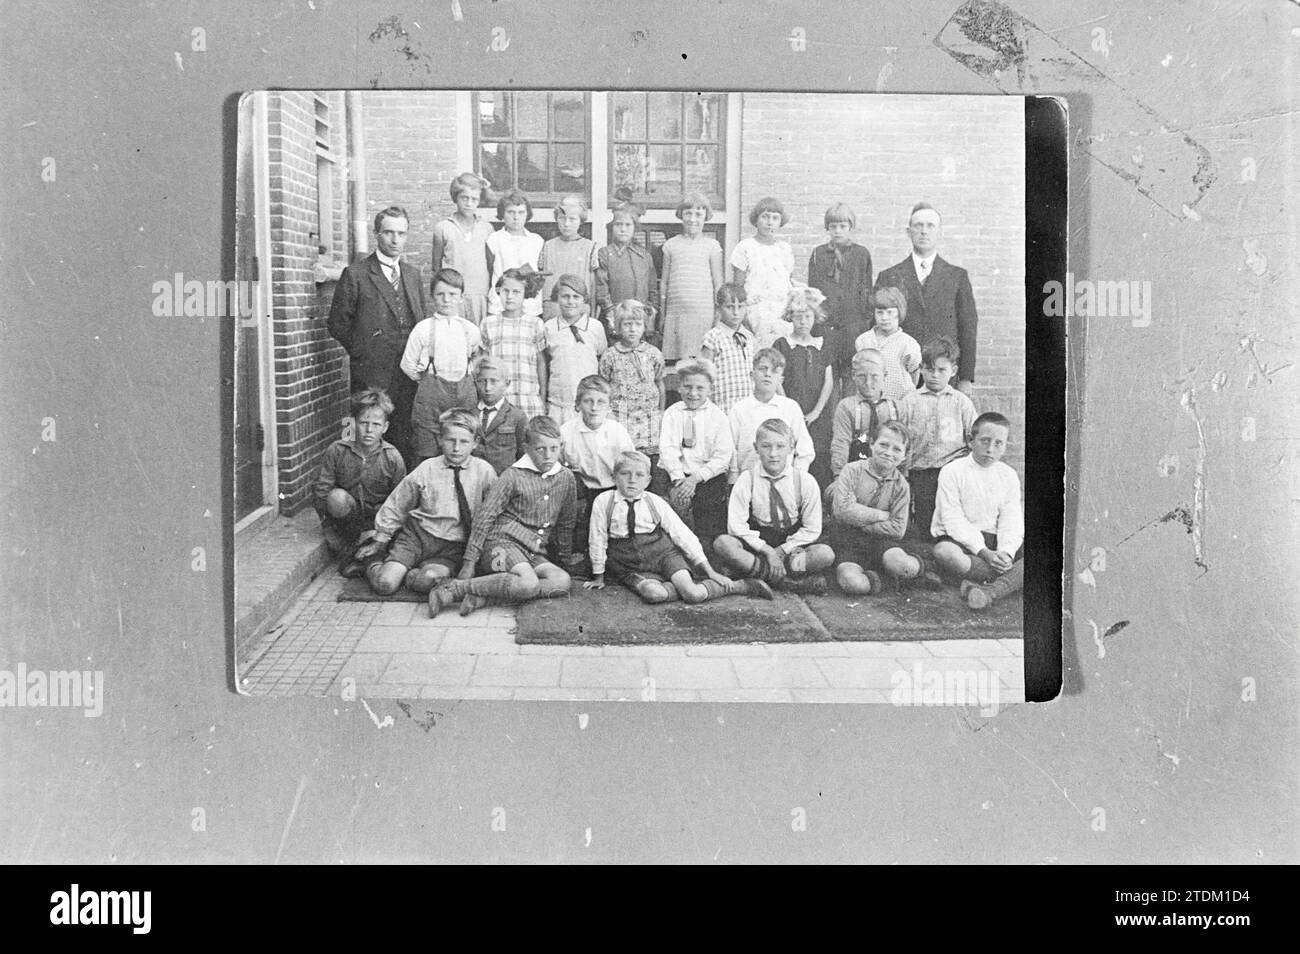 Old school class photo, Whizgle News from the Past, Tailored for the Future. Explore historical narratives, Dutch The Netherlands agency image with a modern perspective, bridging the gap between yesterday's events and tomorrow's insights. A timeless journey shaping the stories that shape our future Stock Photo